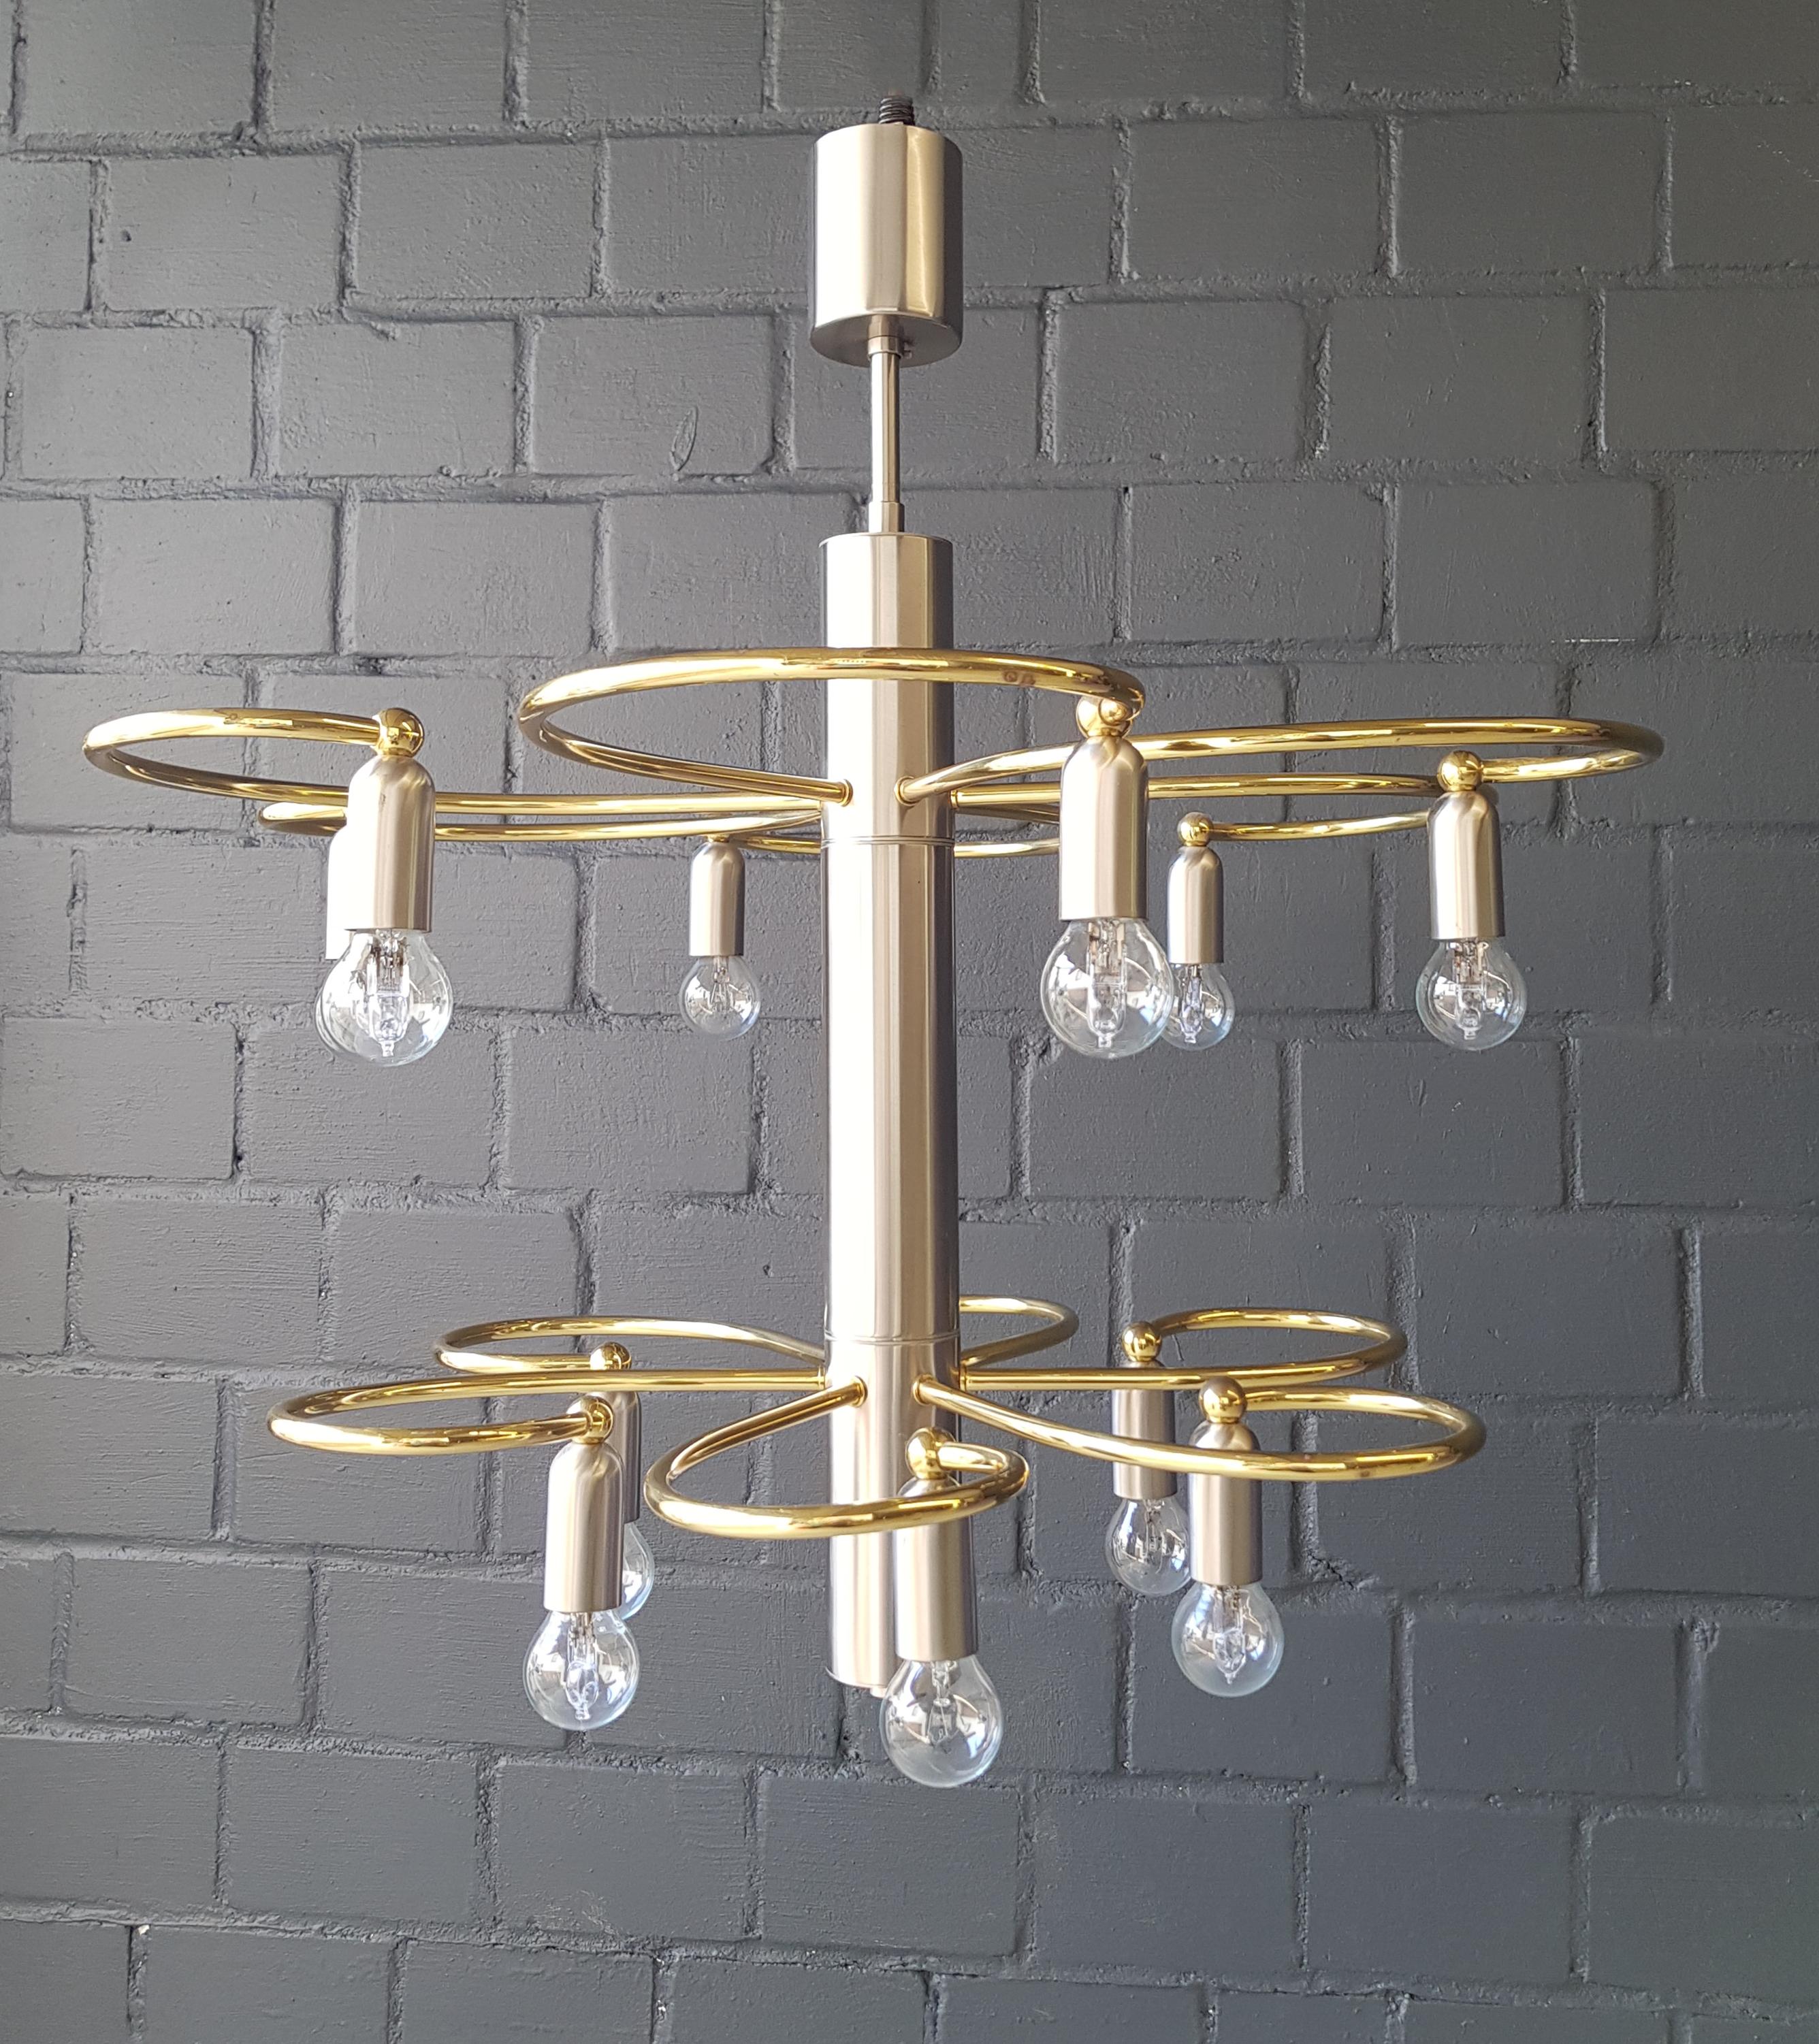 Introducing a Vintage Pendant Chandelier that seamlessly combines classic design with modern functionality. Its exquisite features are designed to captivate and enhance your space.

Specifications:
- Overall Height: 66 cm
- Diameter: 66 cm
- Weight